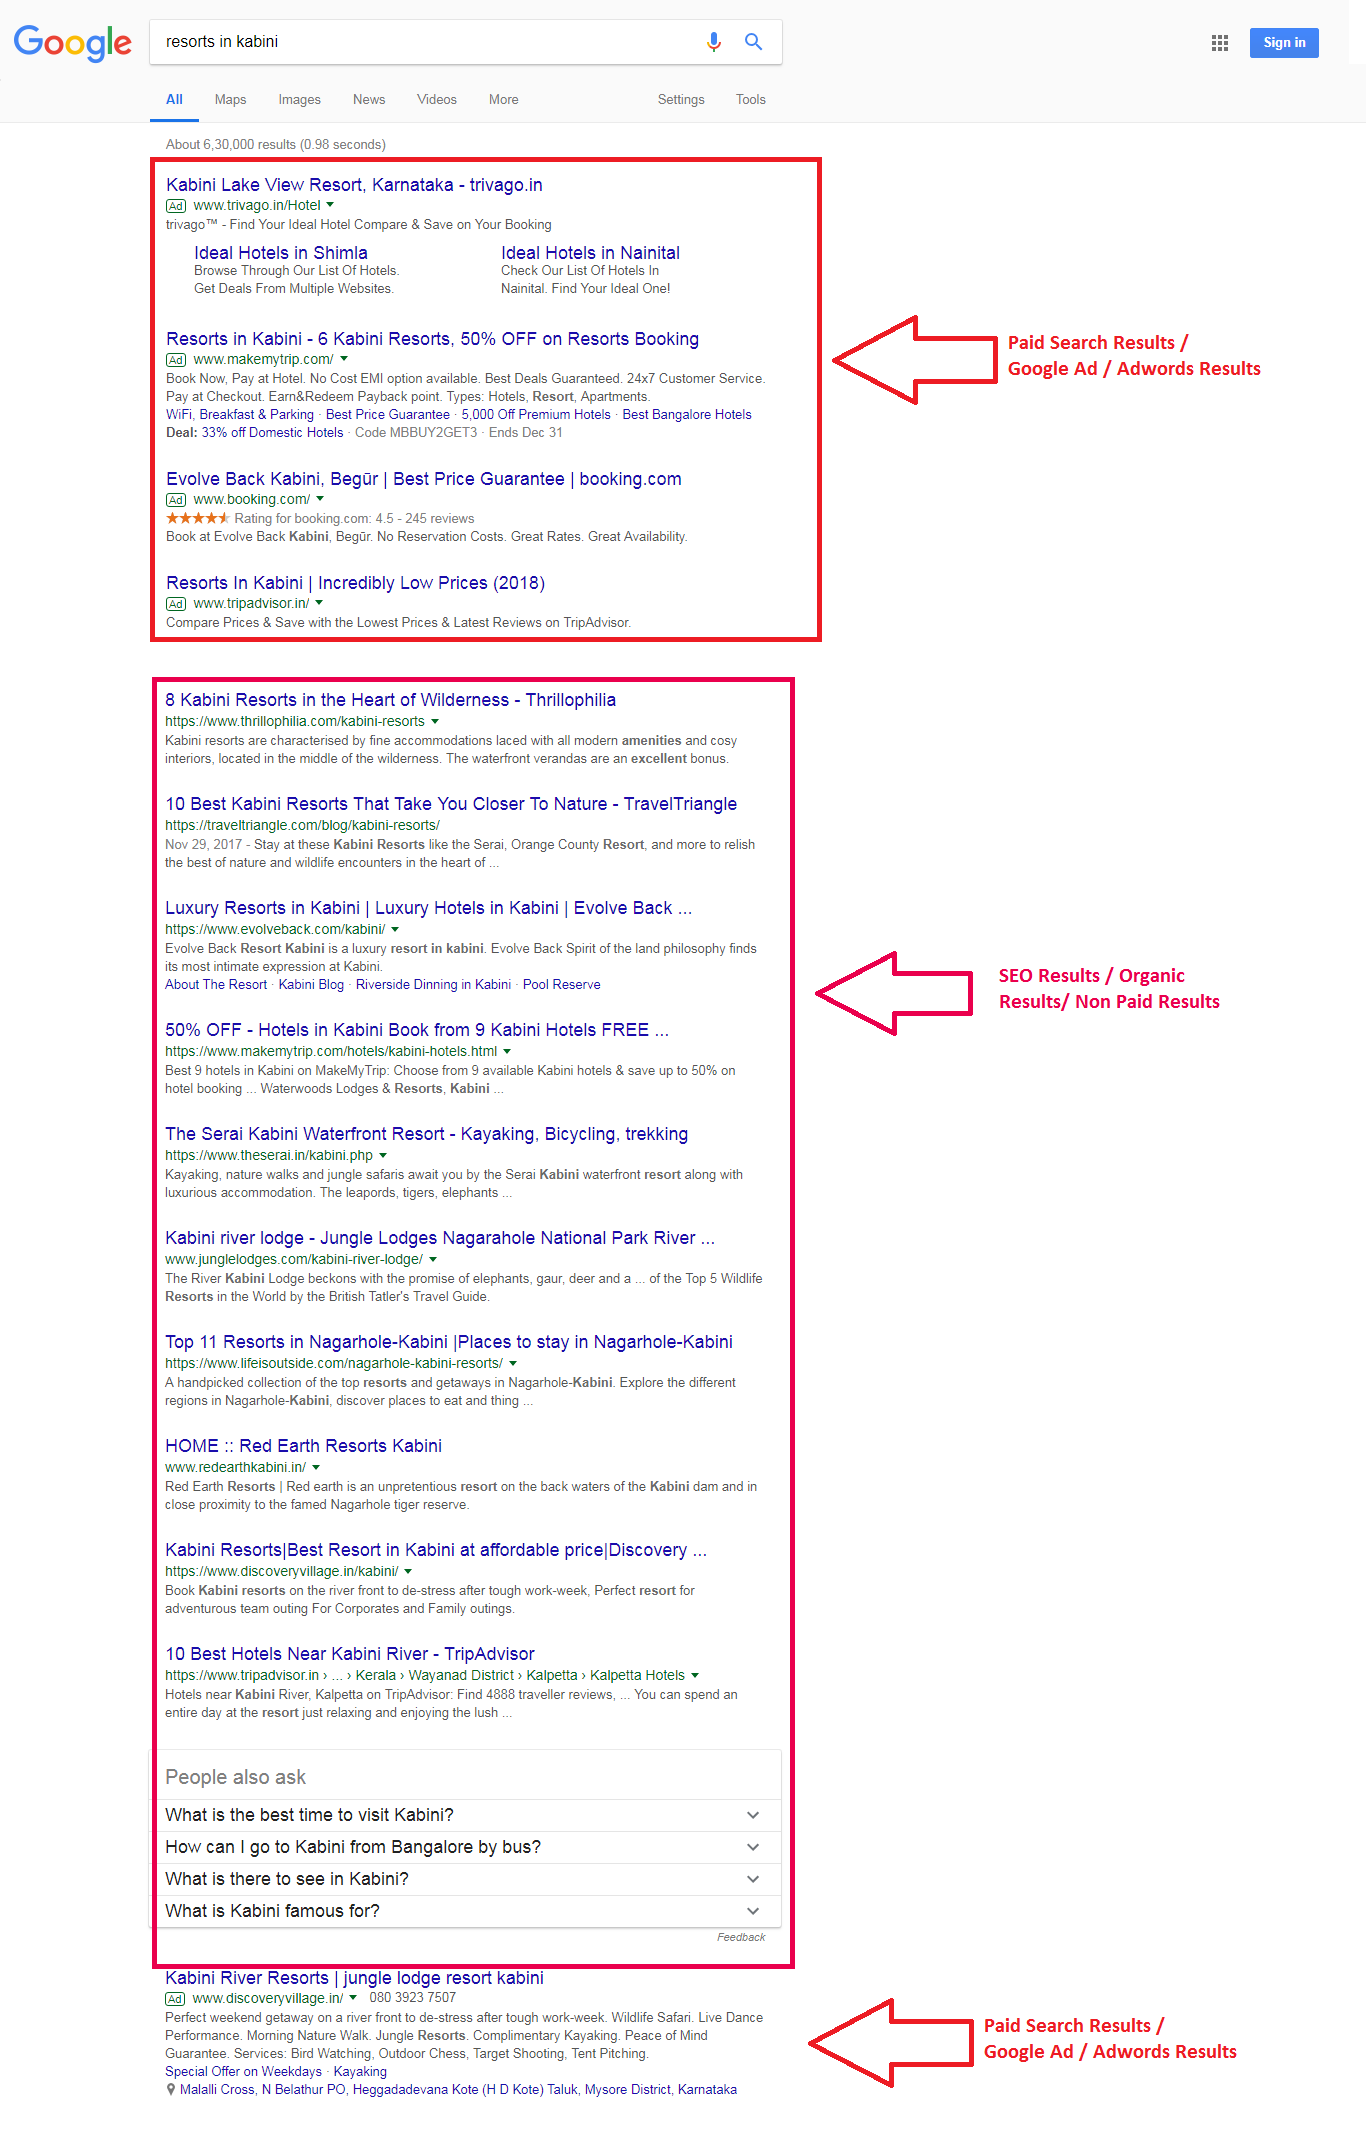 Google Ads Search Results